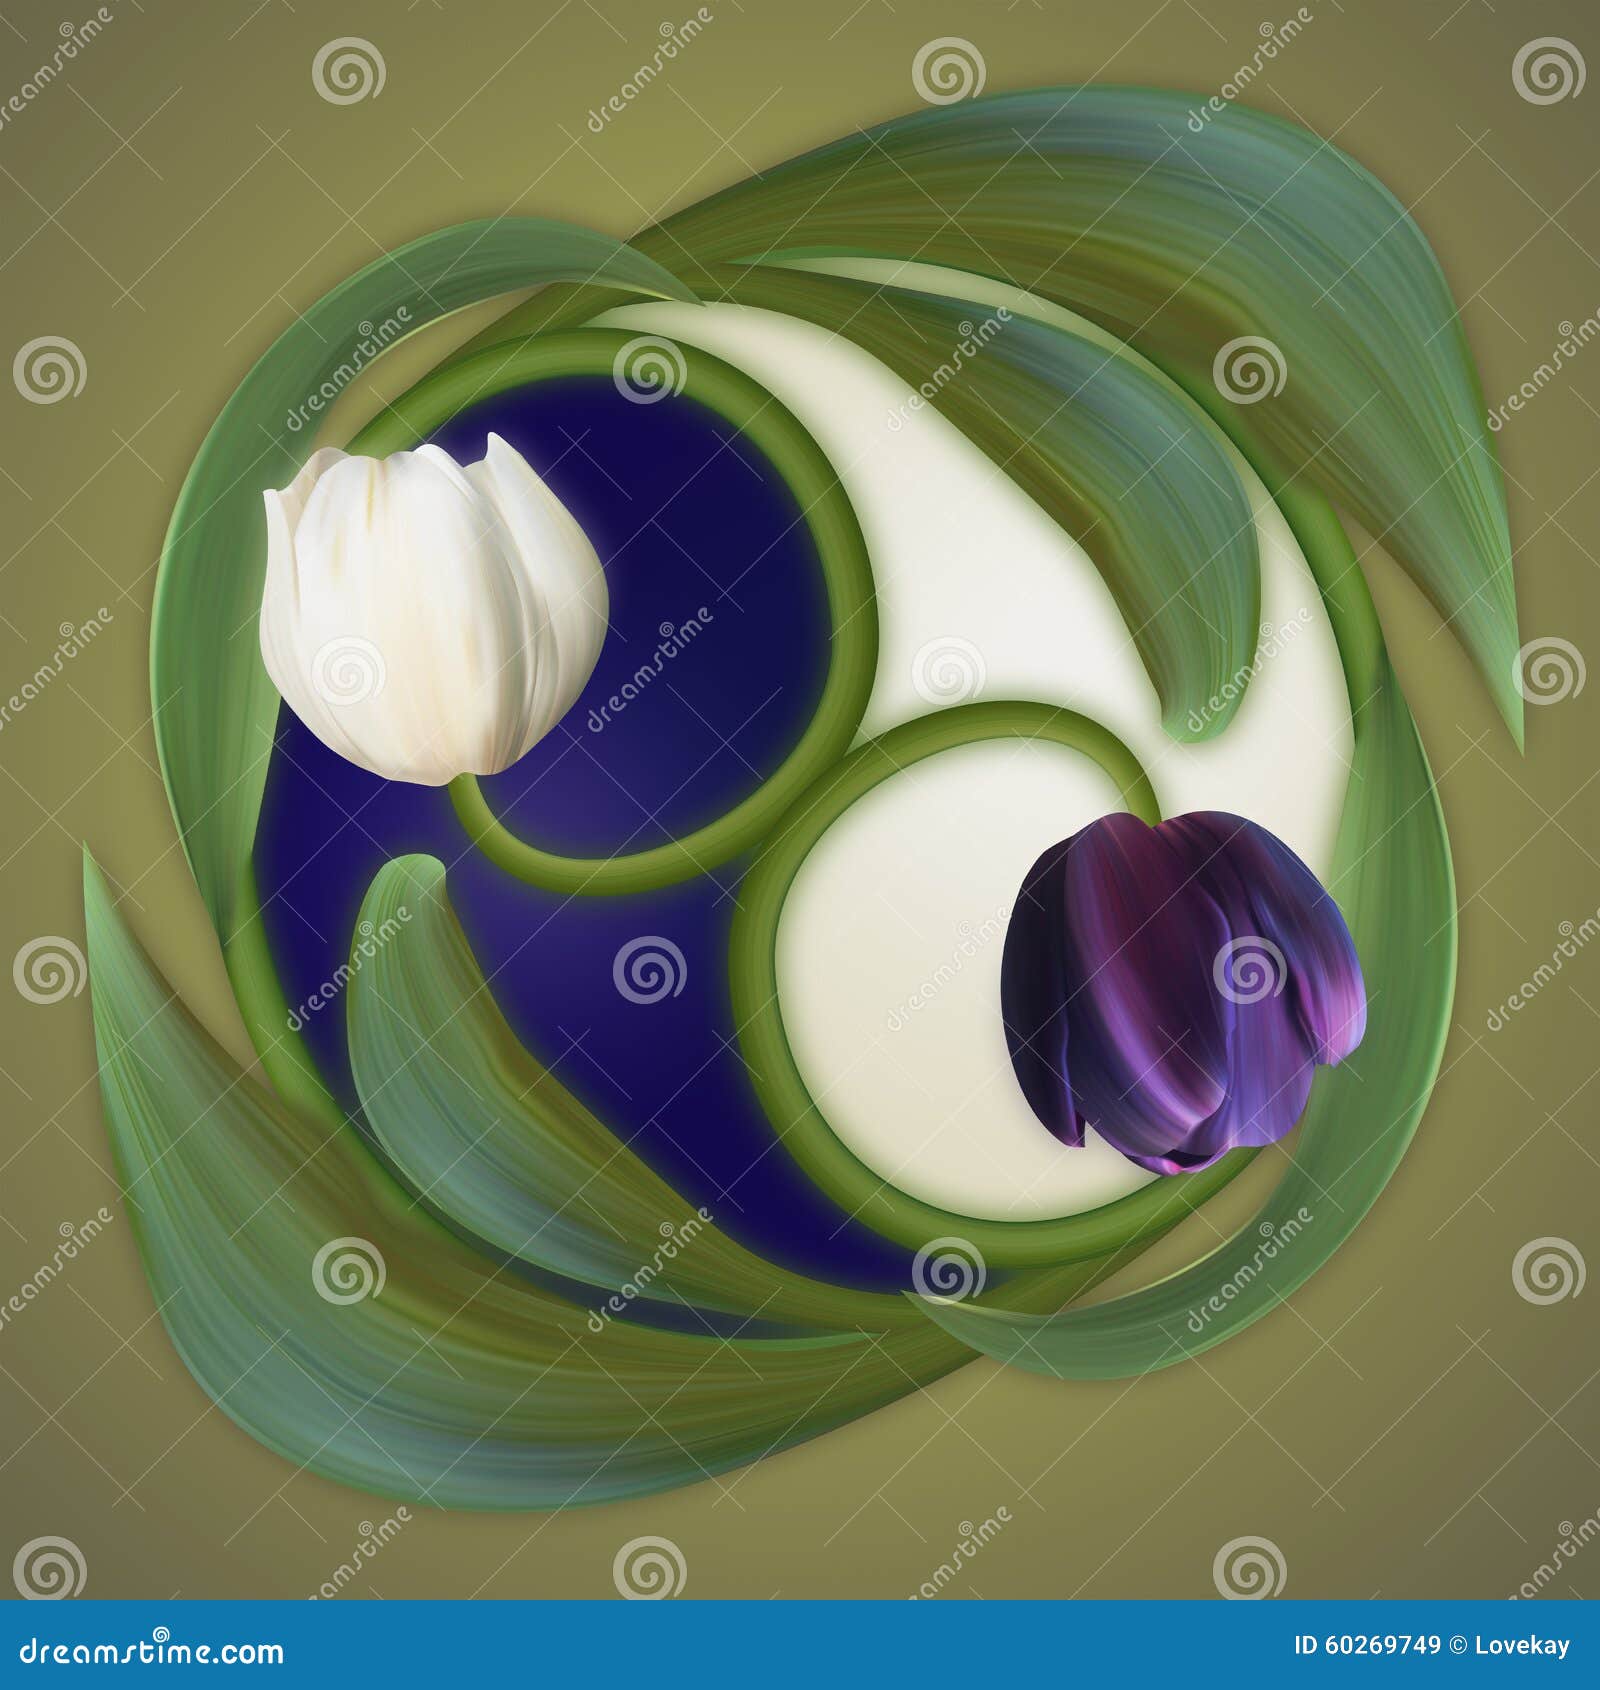 conceptual banner of the yin-yang simbol. poster of duality.